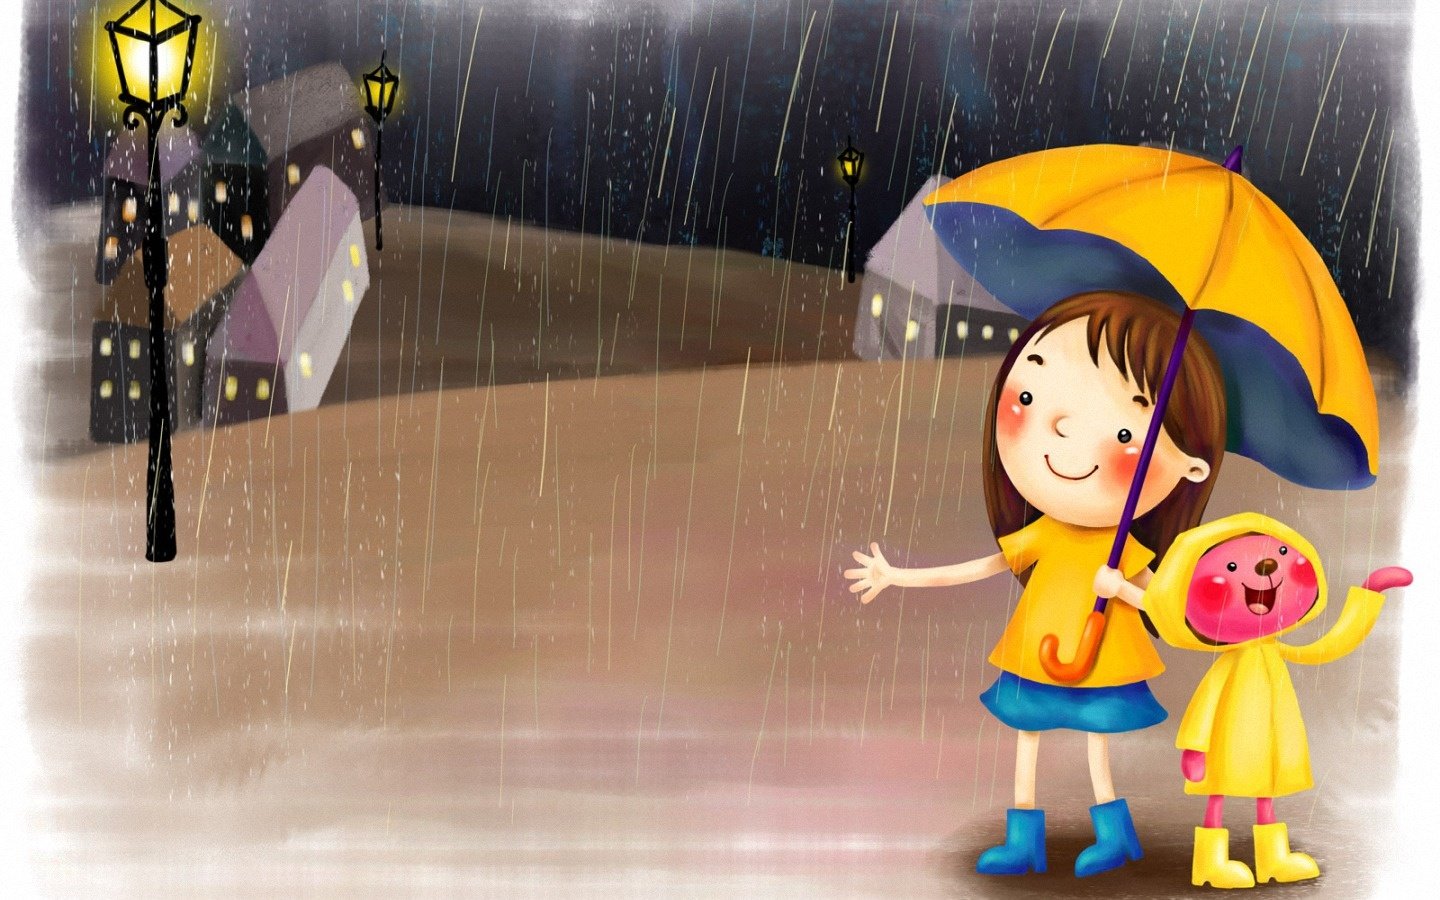 49 Animated Rain Wallpapers For Desktop On Wallpapersafari I love you for ever a beautiful amazon with the umbrella in the cold snow animated screen saver wallpapers mobile 240x320 3d gif animation free download. animated rain wallpapers for desktop on